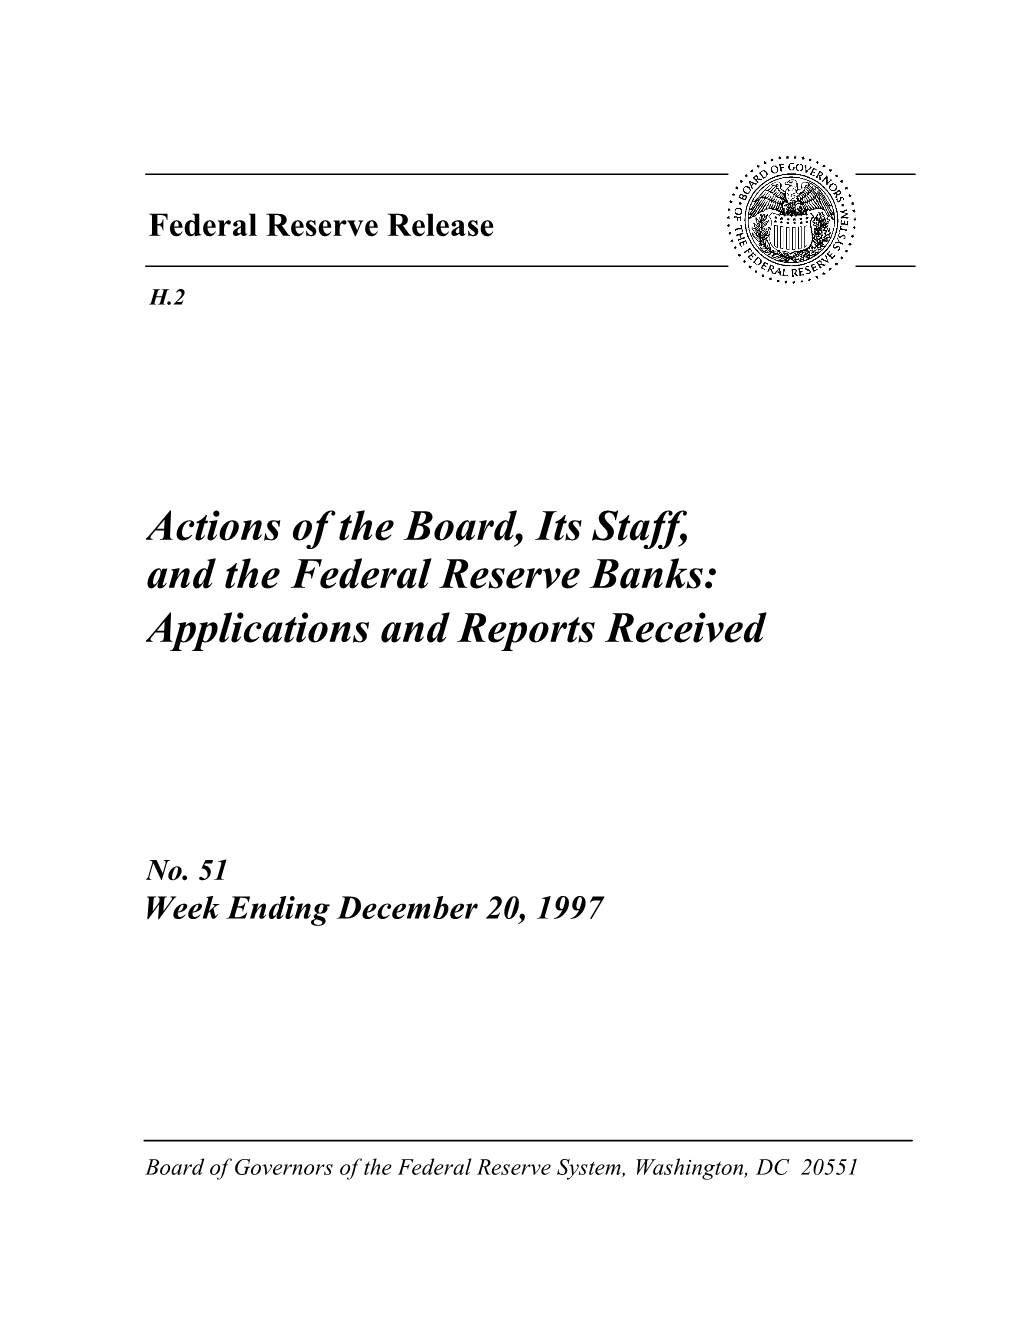 Actions of the Board, Its Staff, and the Federal Reserve Banks: Applications and Reports Received